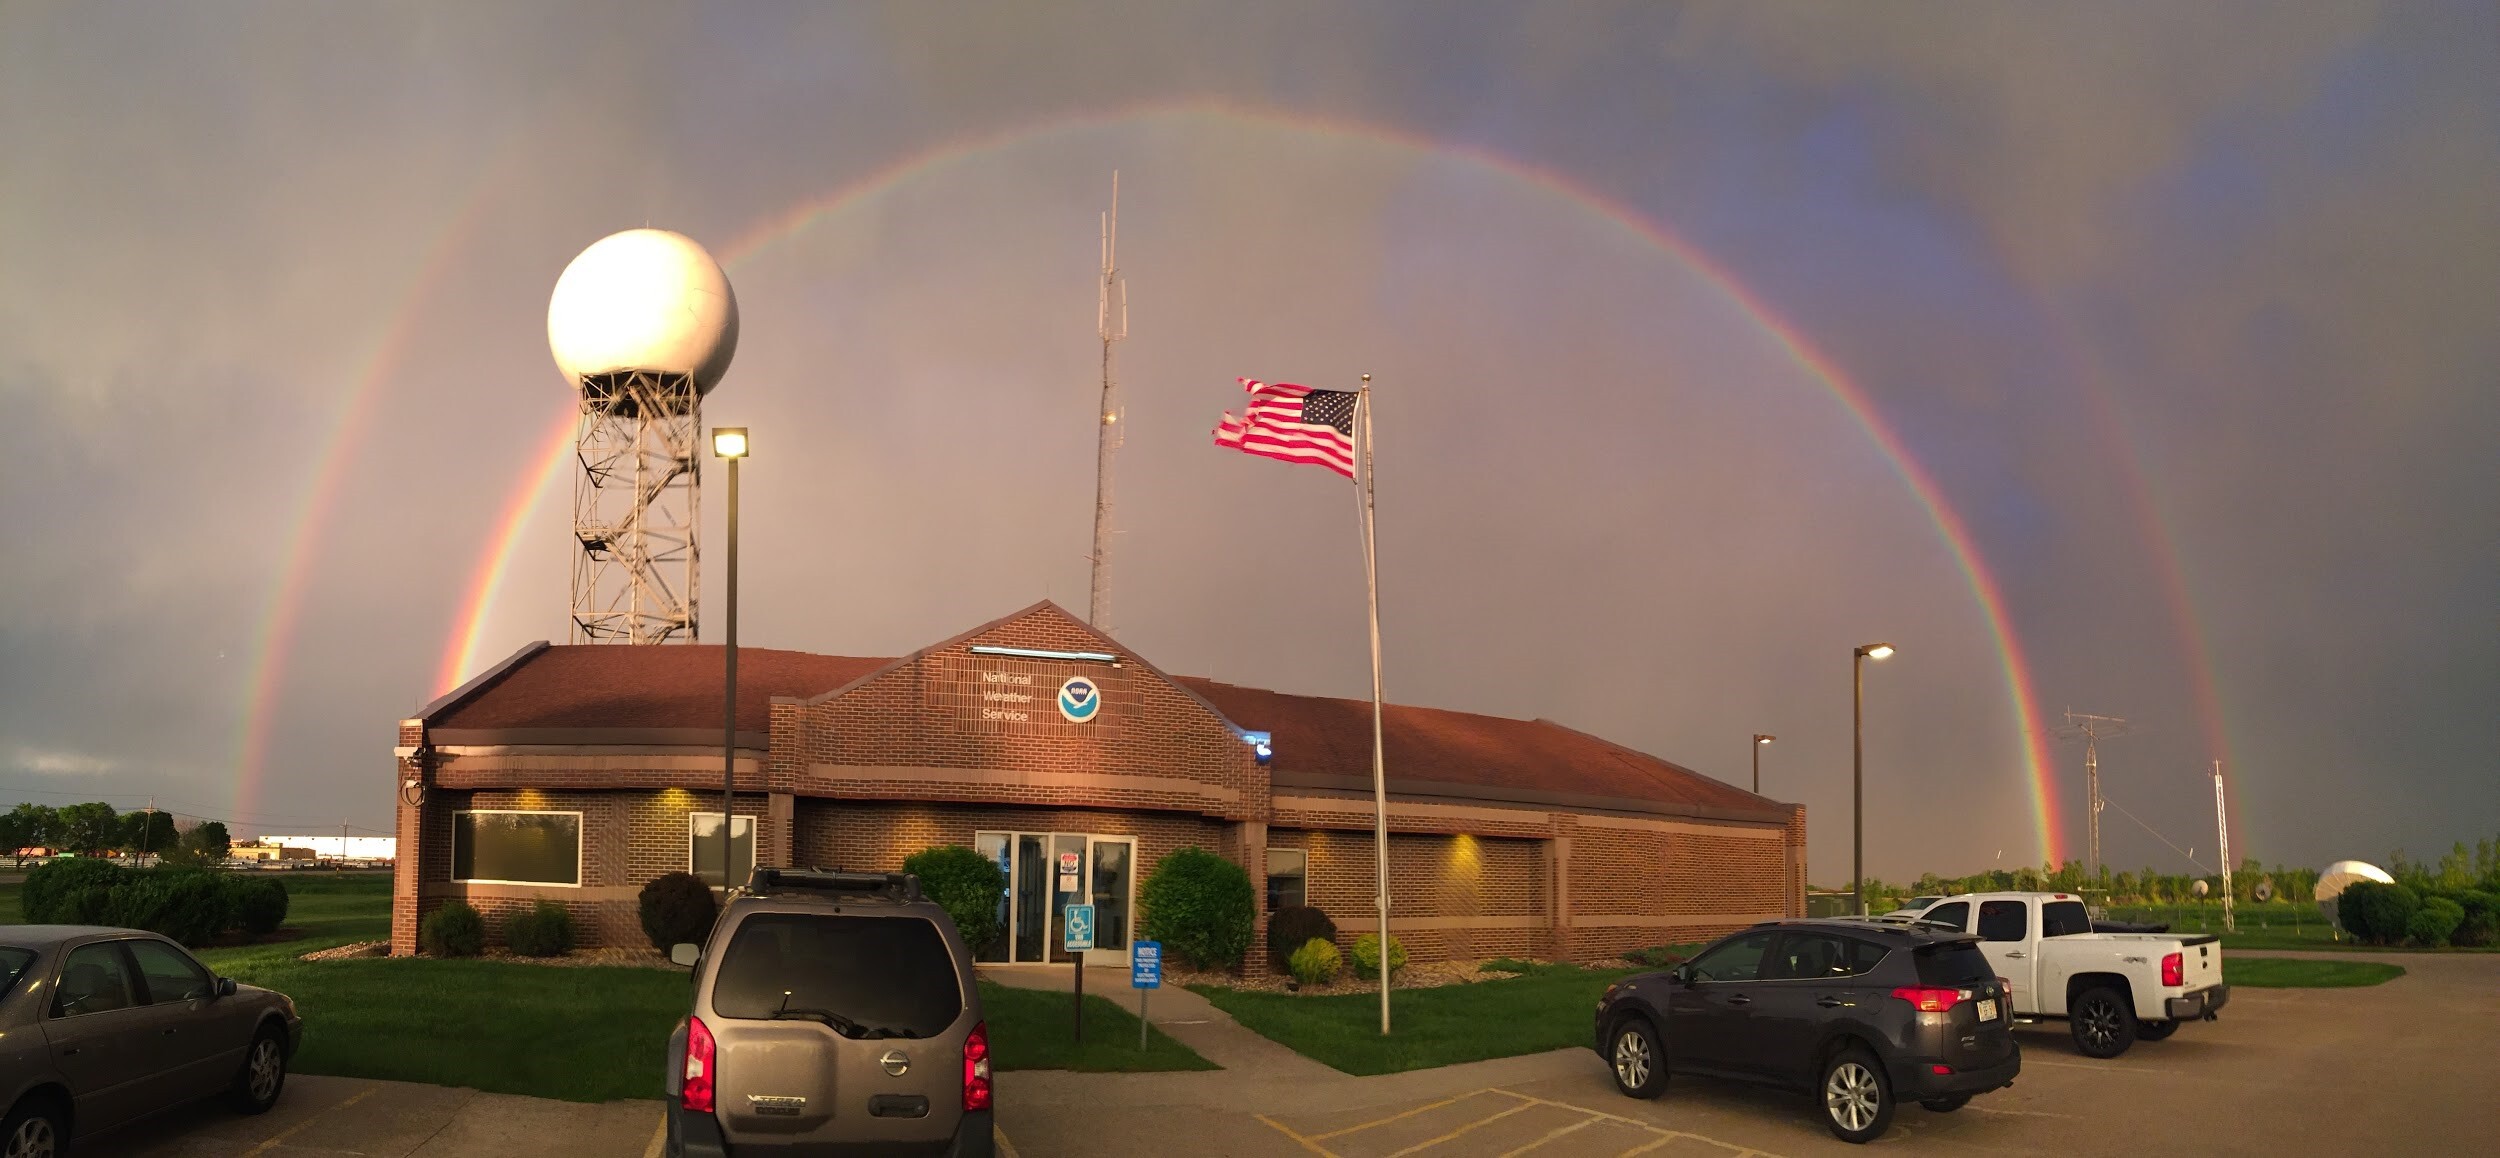  A double rainbow forms over a building with the NOAA and National Weather Service logos, an American flag, and a weather radar. 